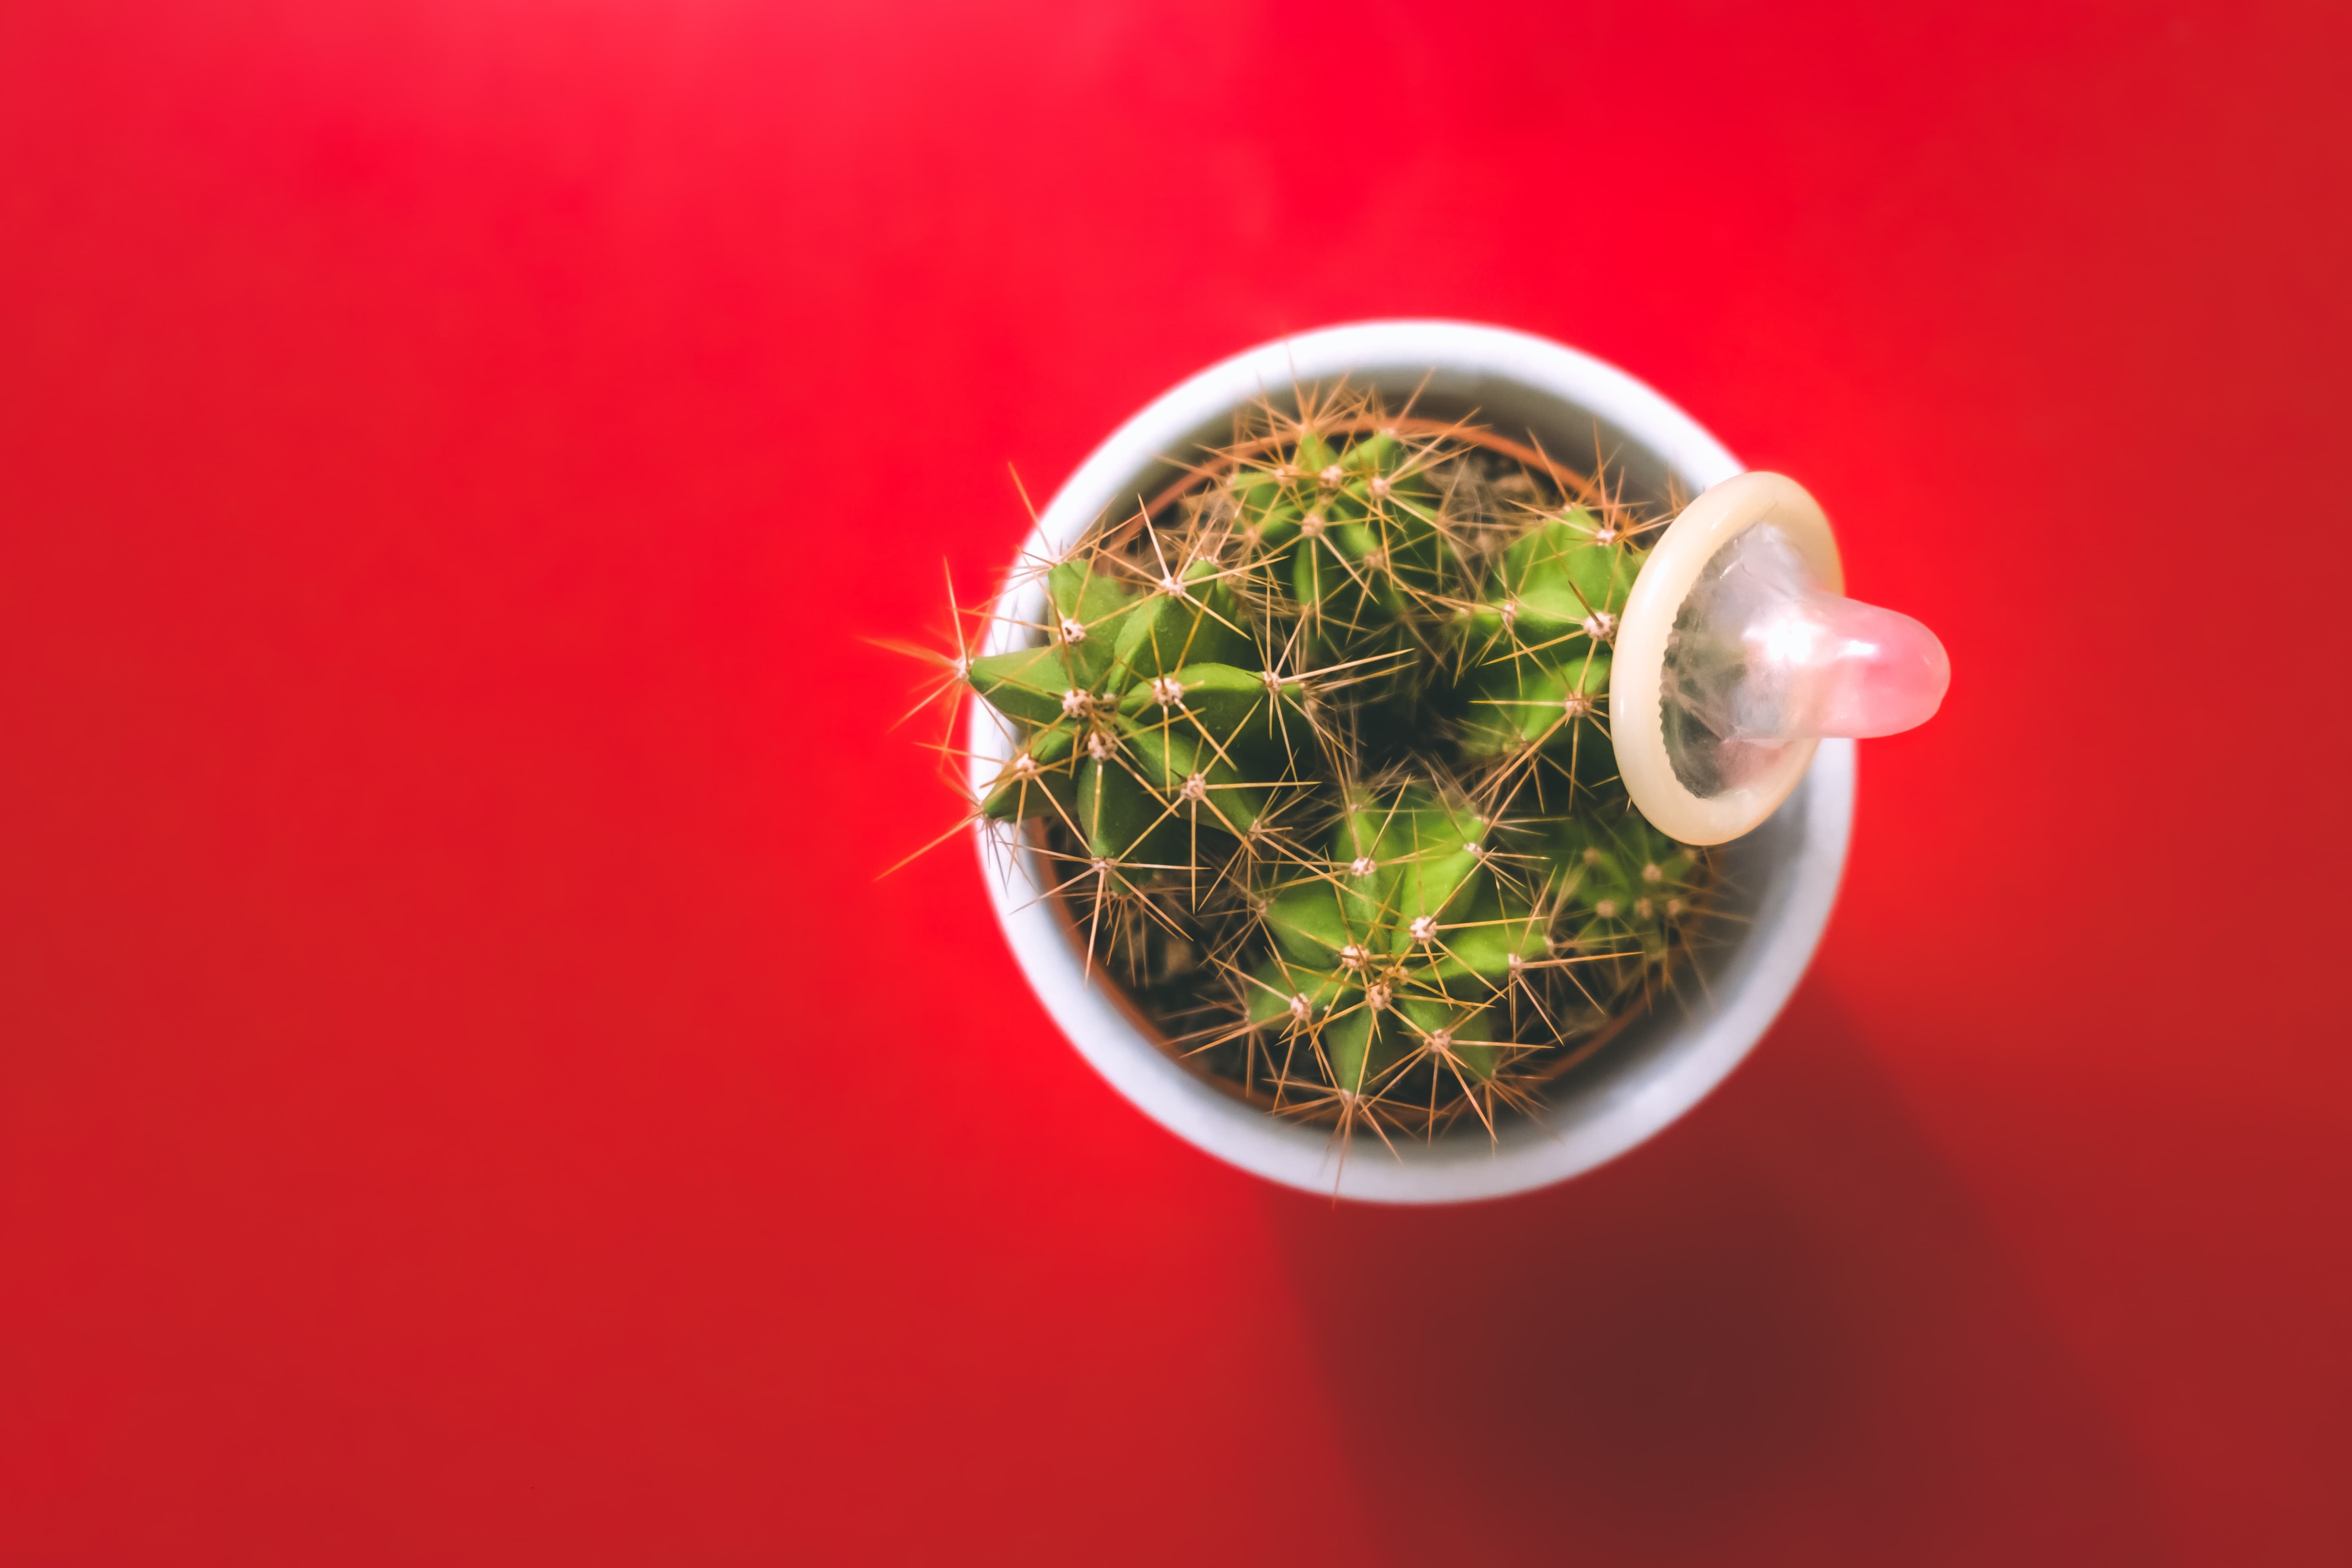 A picture of a cactus plant with a condom on the top on a red background